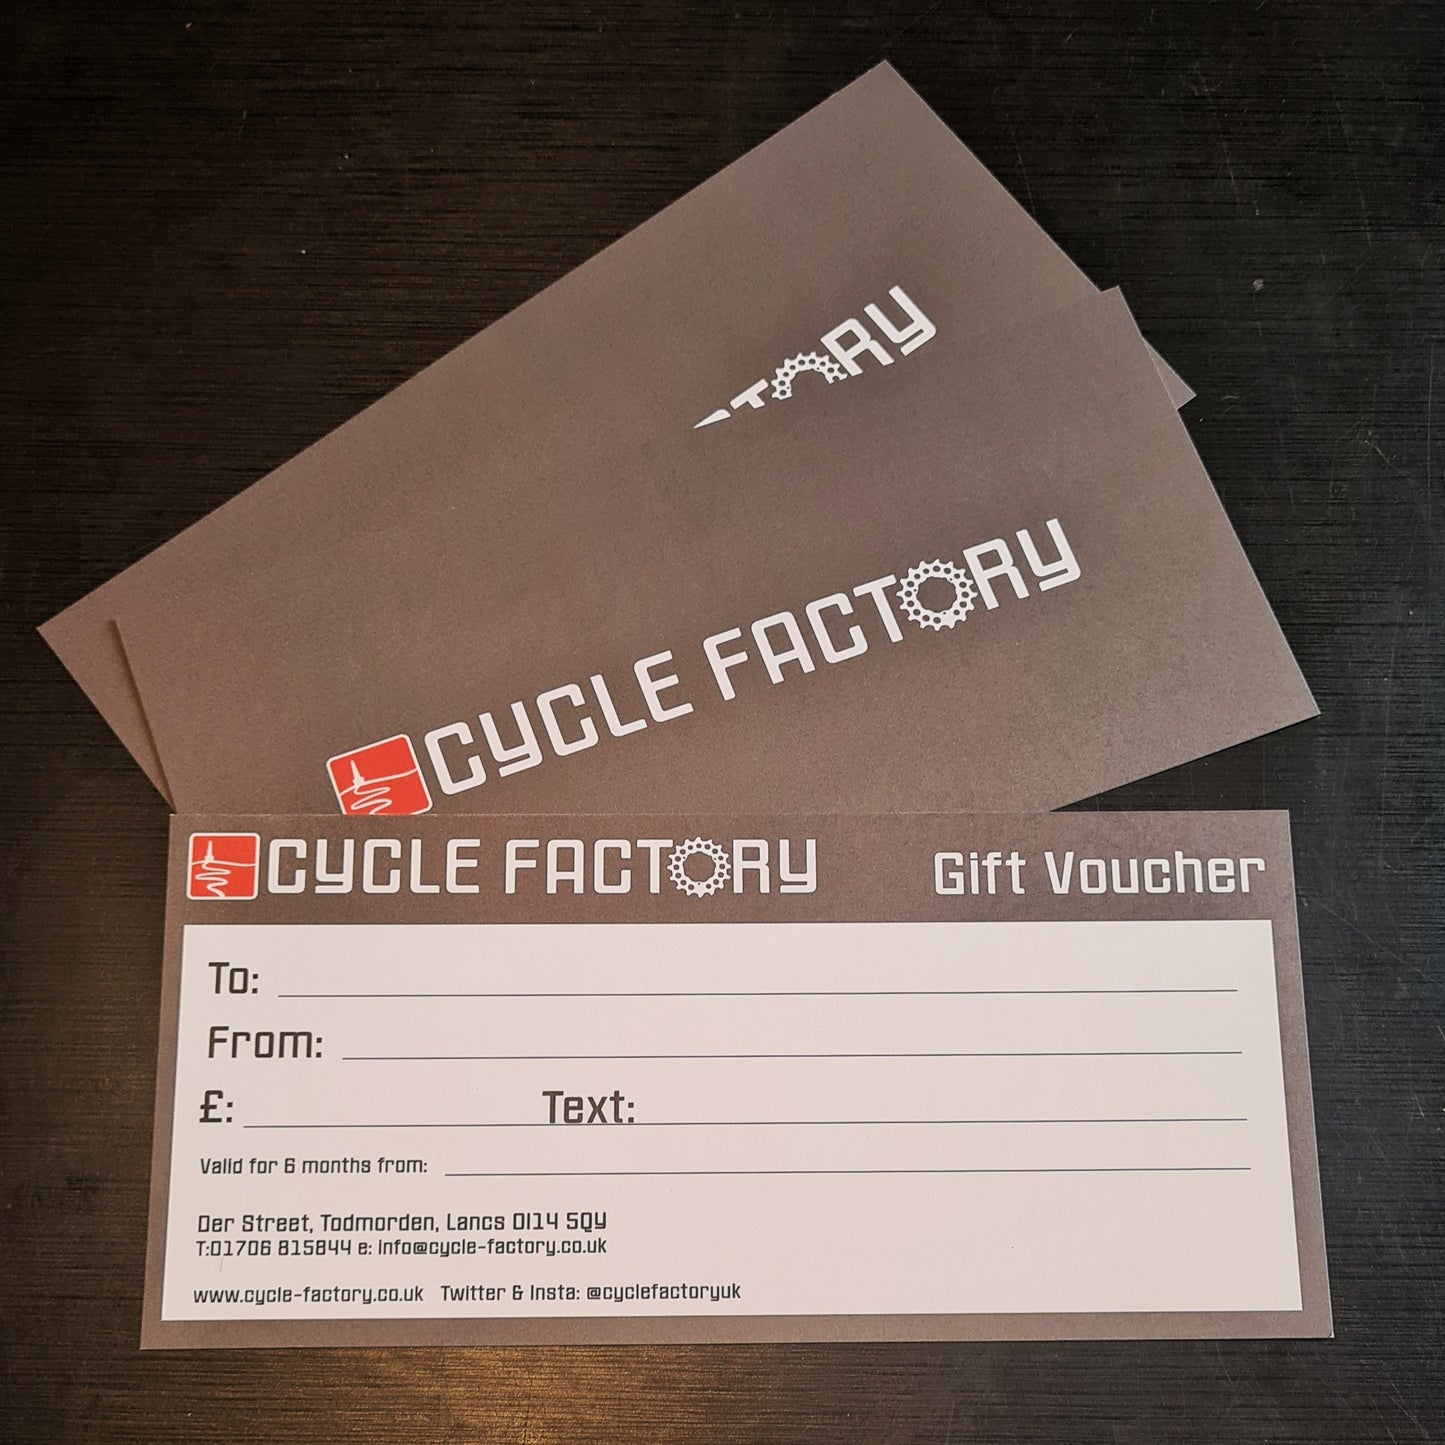 Cycle Factory Voucher